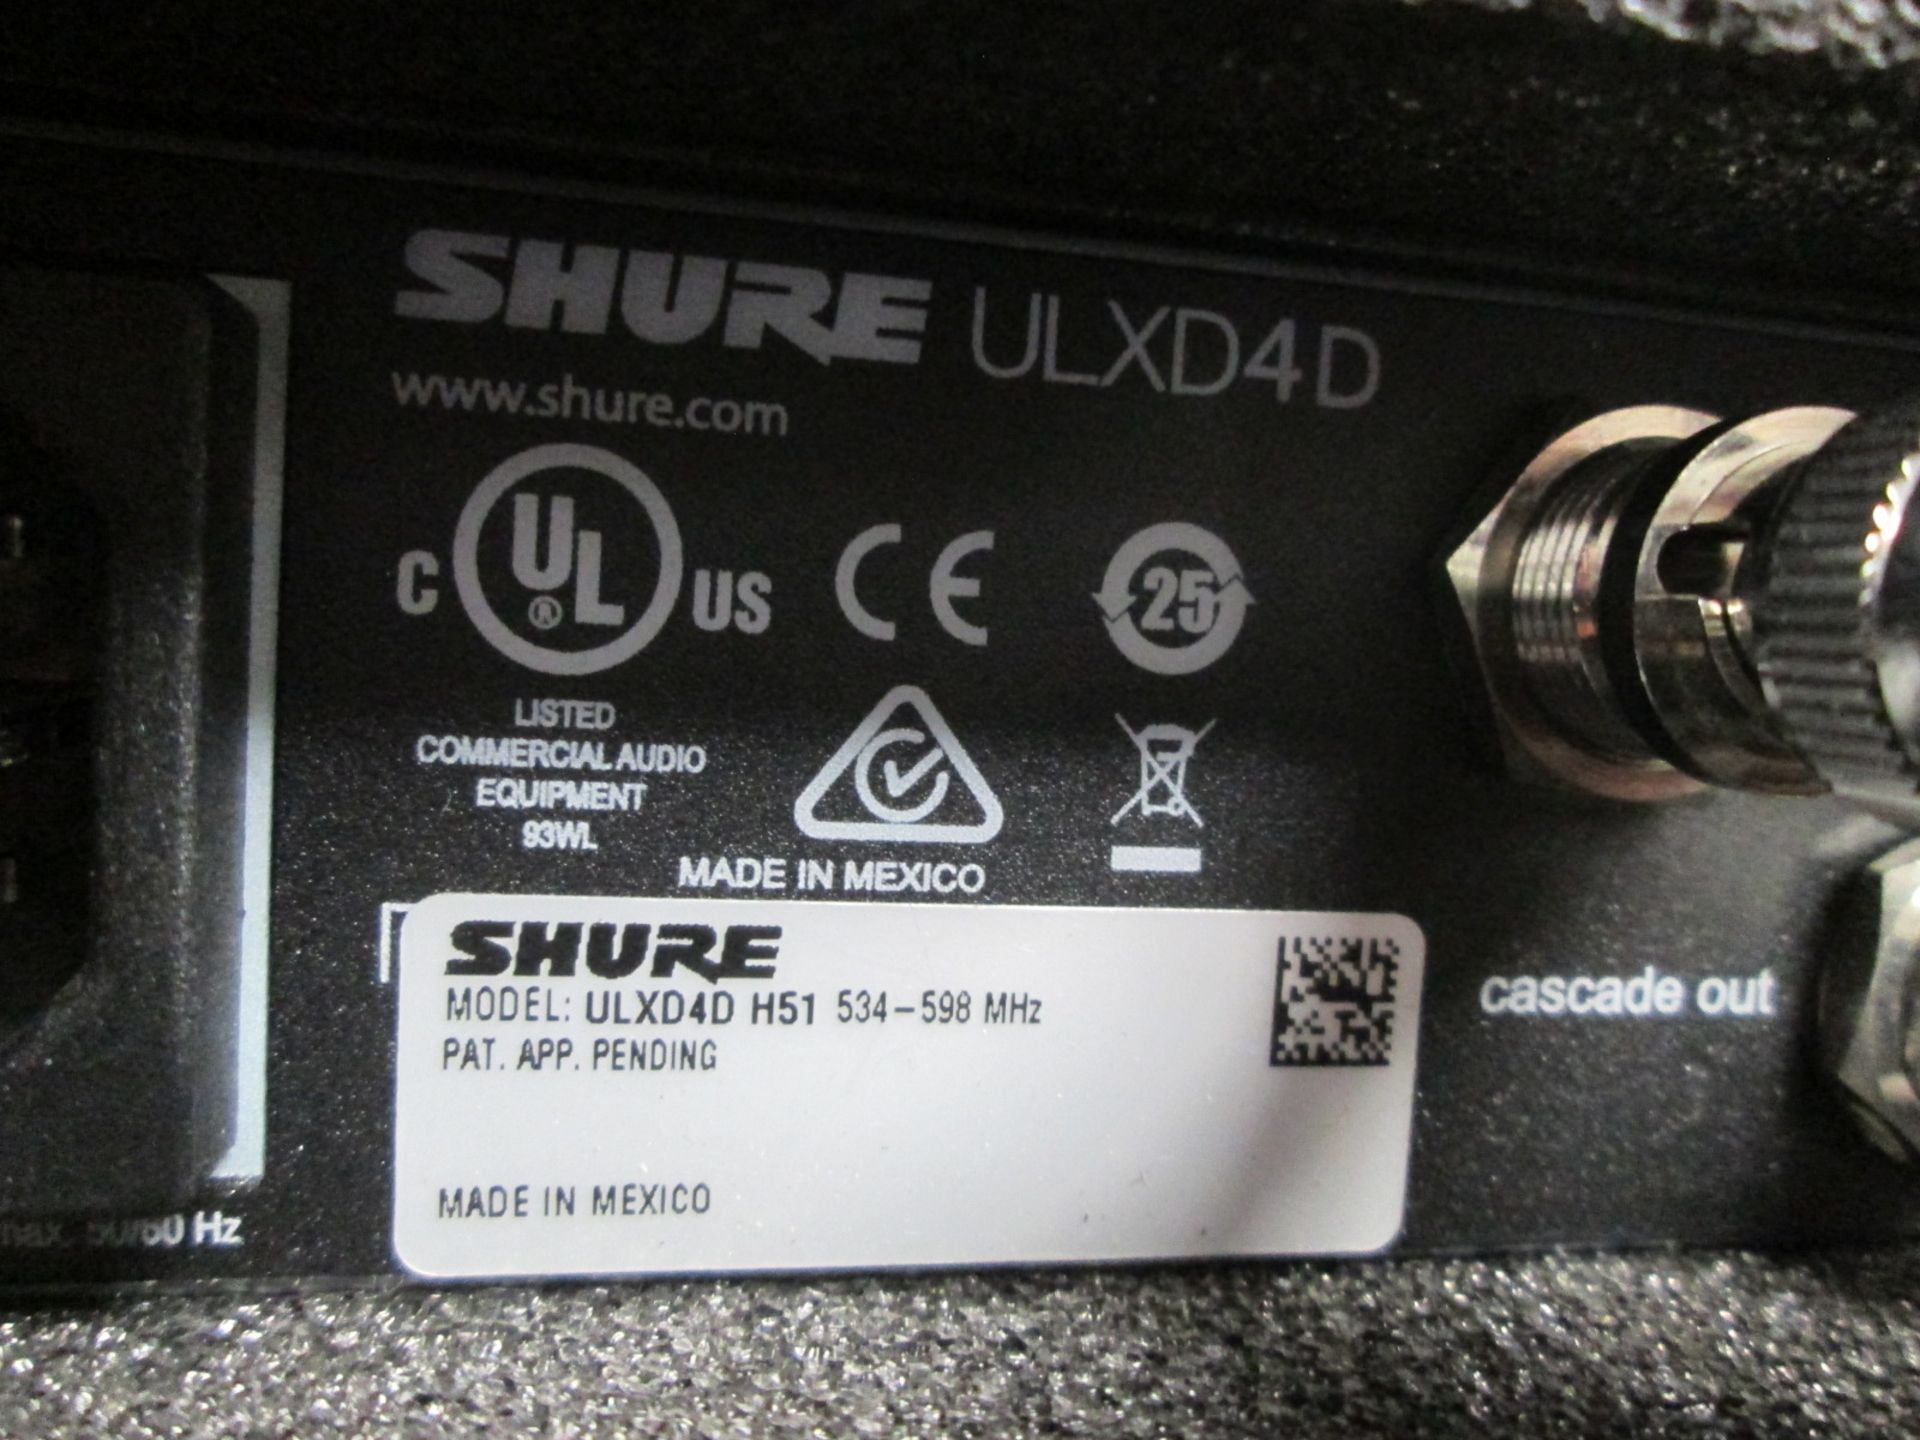 Shure ULXD4D Radio System in Handbag (Qty 2) To include 1 x ULXD4D digital wireless receiver (H51 - Image 5 of 10